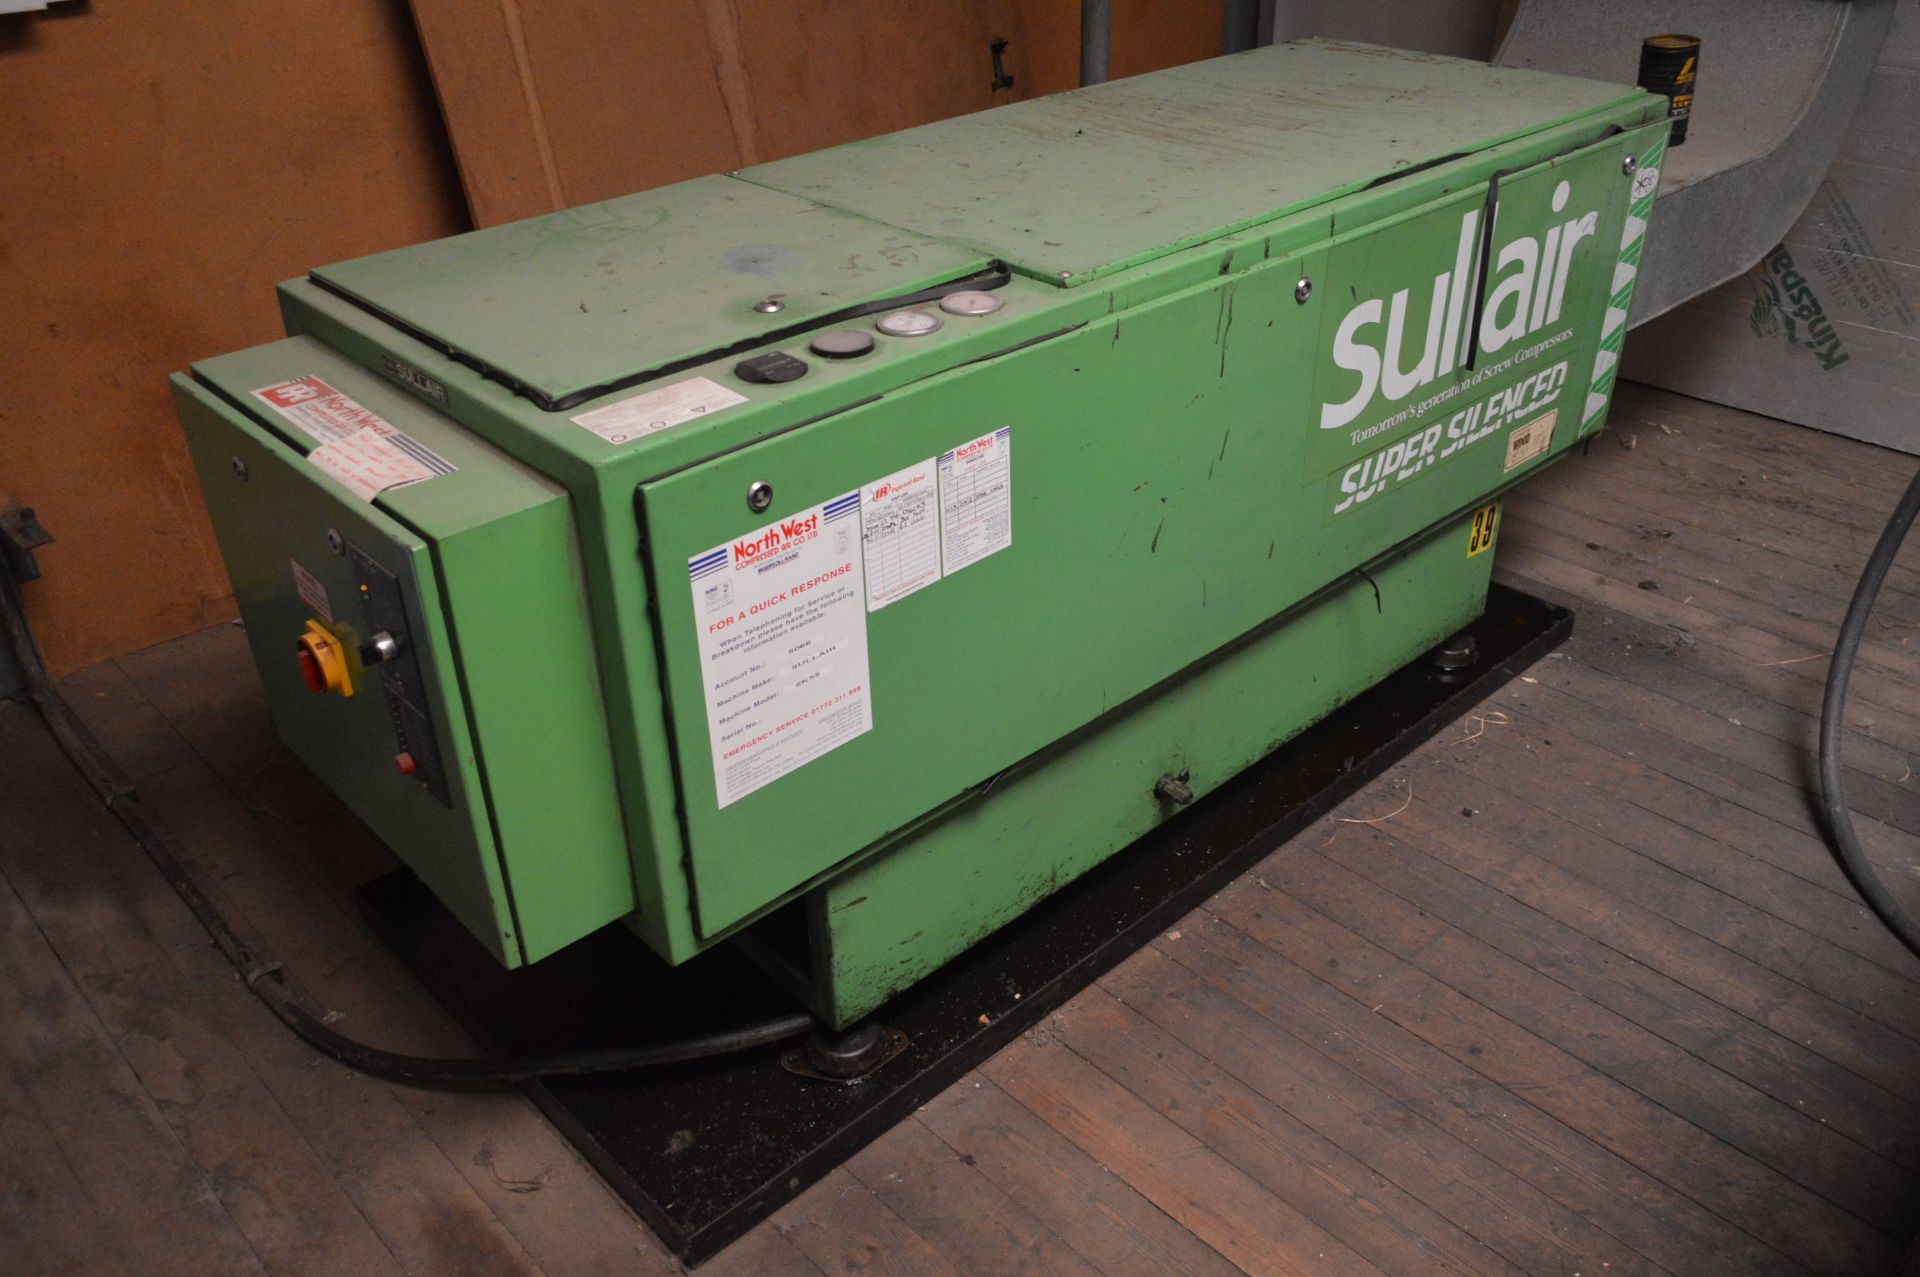 Sullair SK55 PACKAGE AIR COMPRESSOR, indicated hours 21,495 (at time of listing), with ducting to